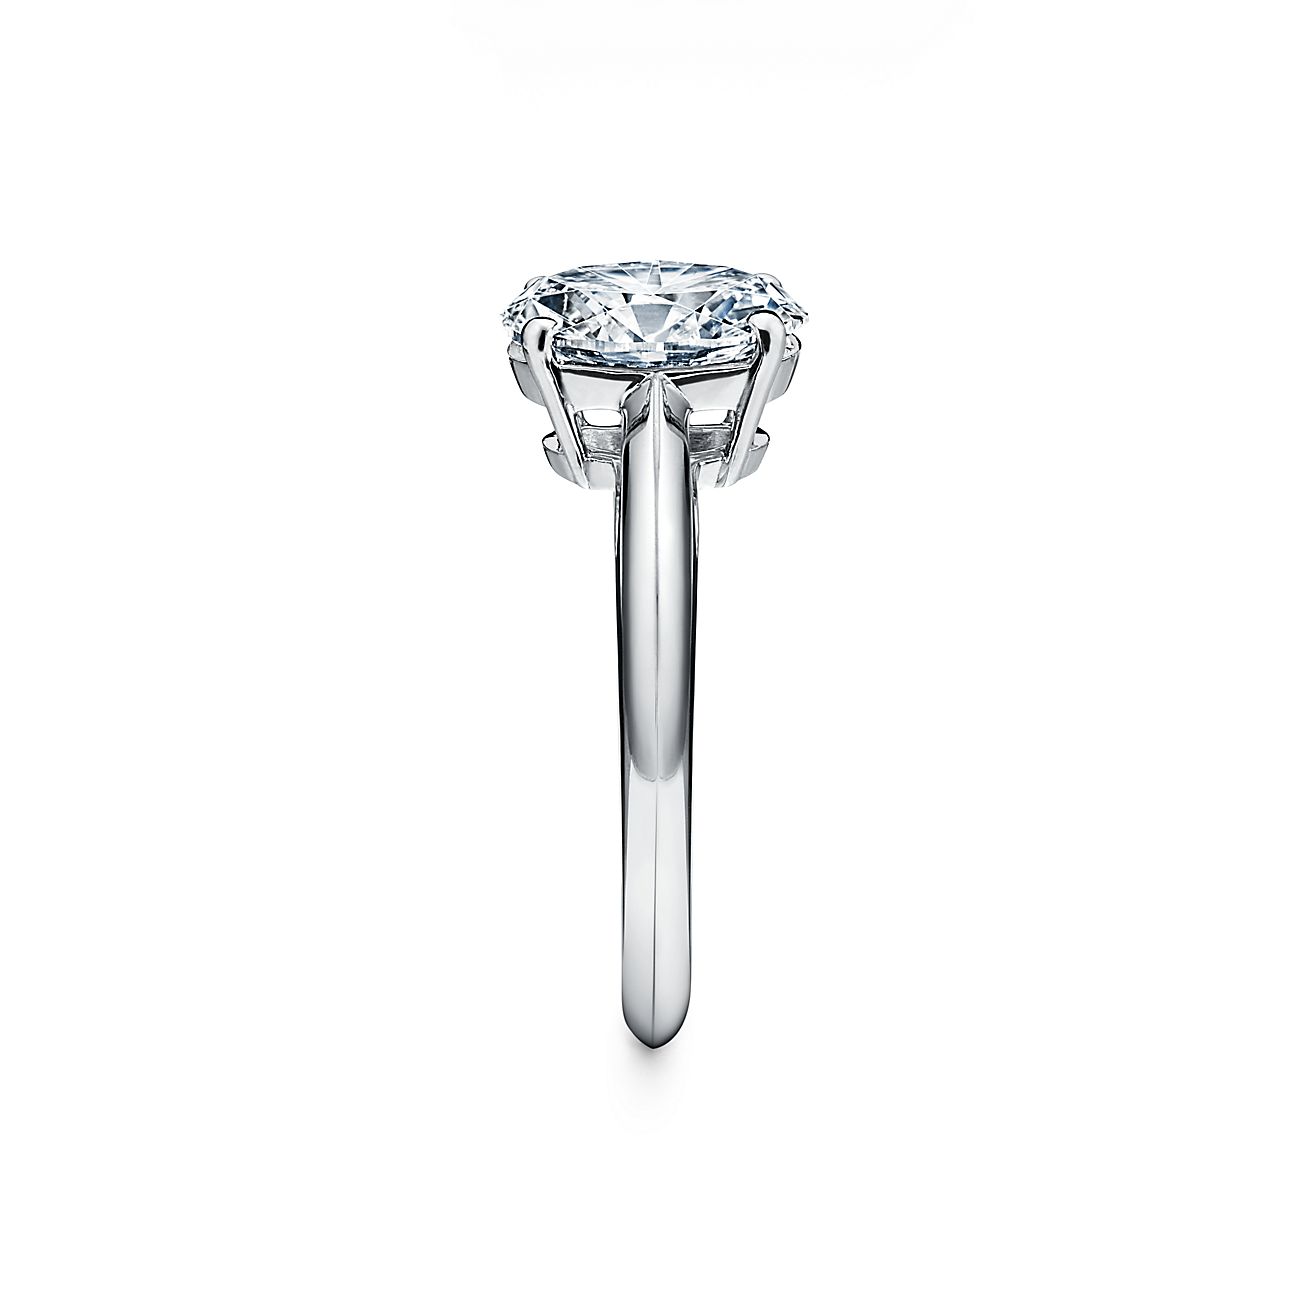 tiffany oval solitaire